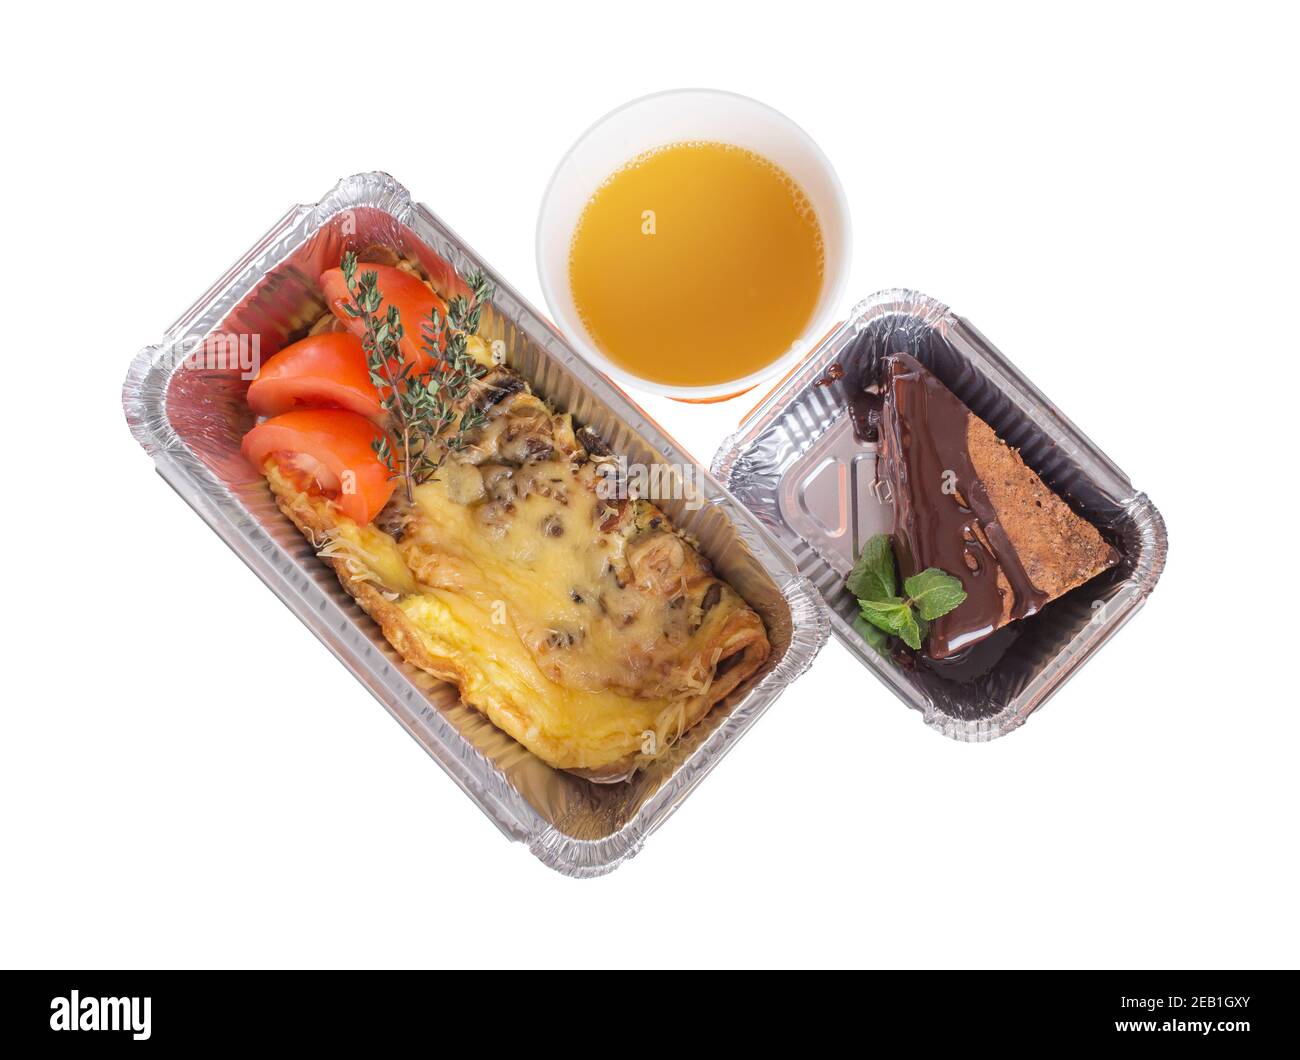 https://c8.alamy.com/comp/2EB1GXY/omelet-and-dessert-in-takeaway-containers-isolated-on-a-white-background-2EB1GXY.jpg